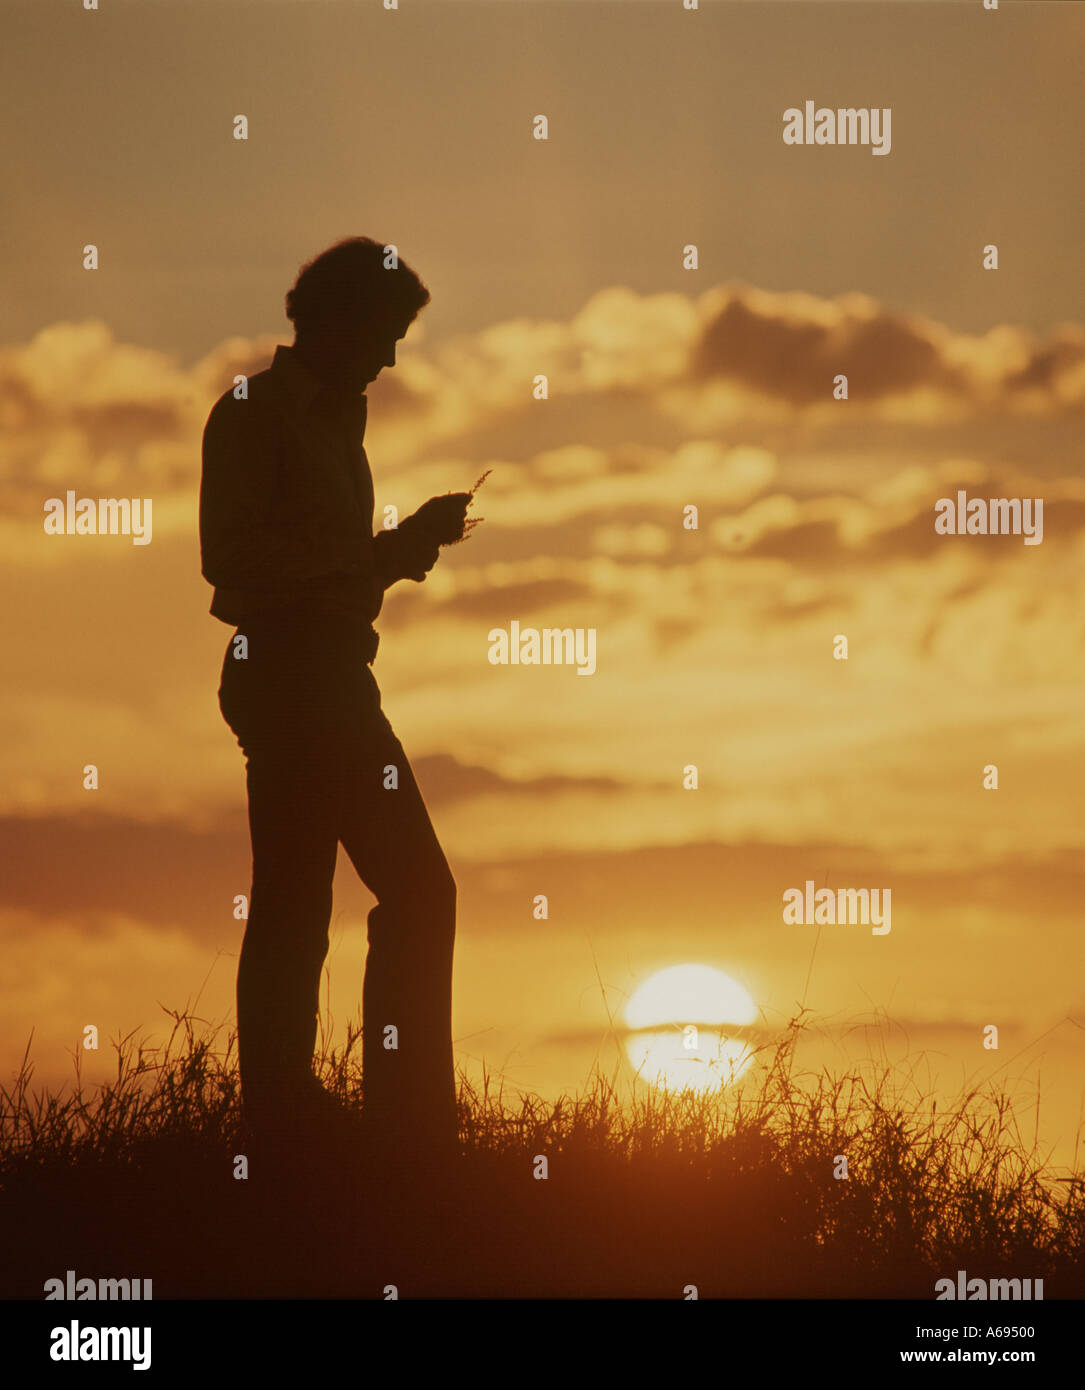 pensive man alone in field at sunset Stock Photo